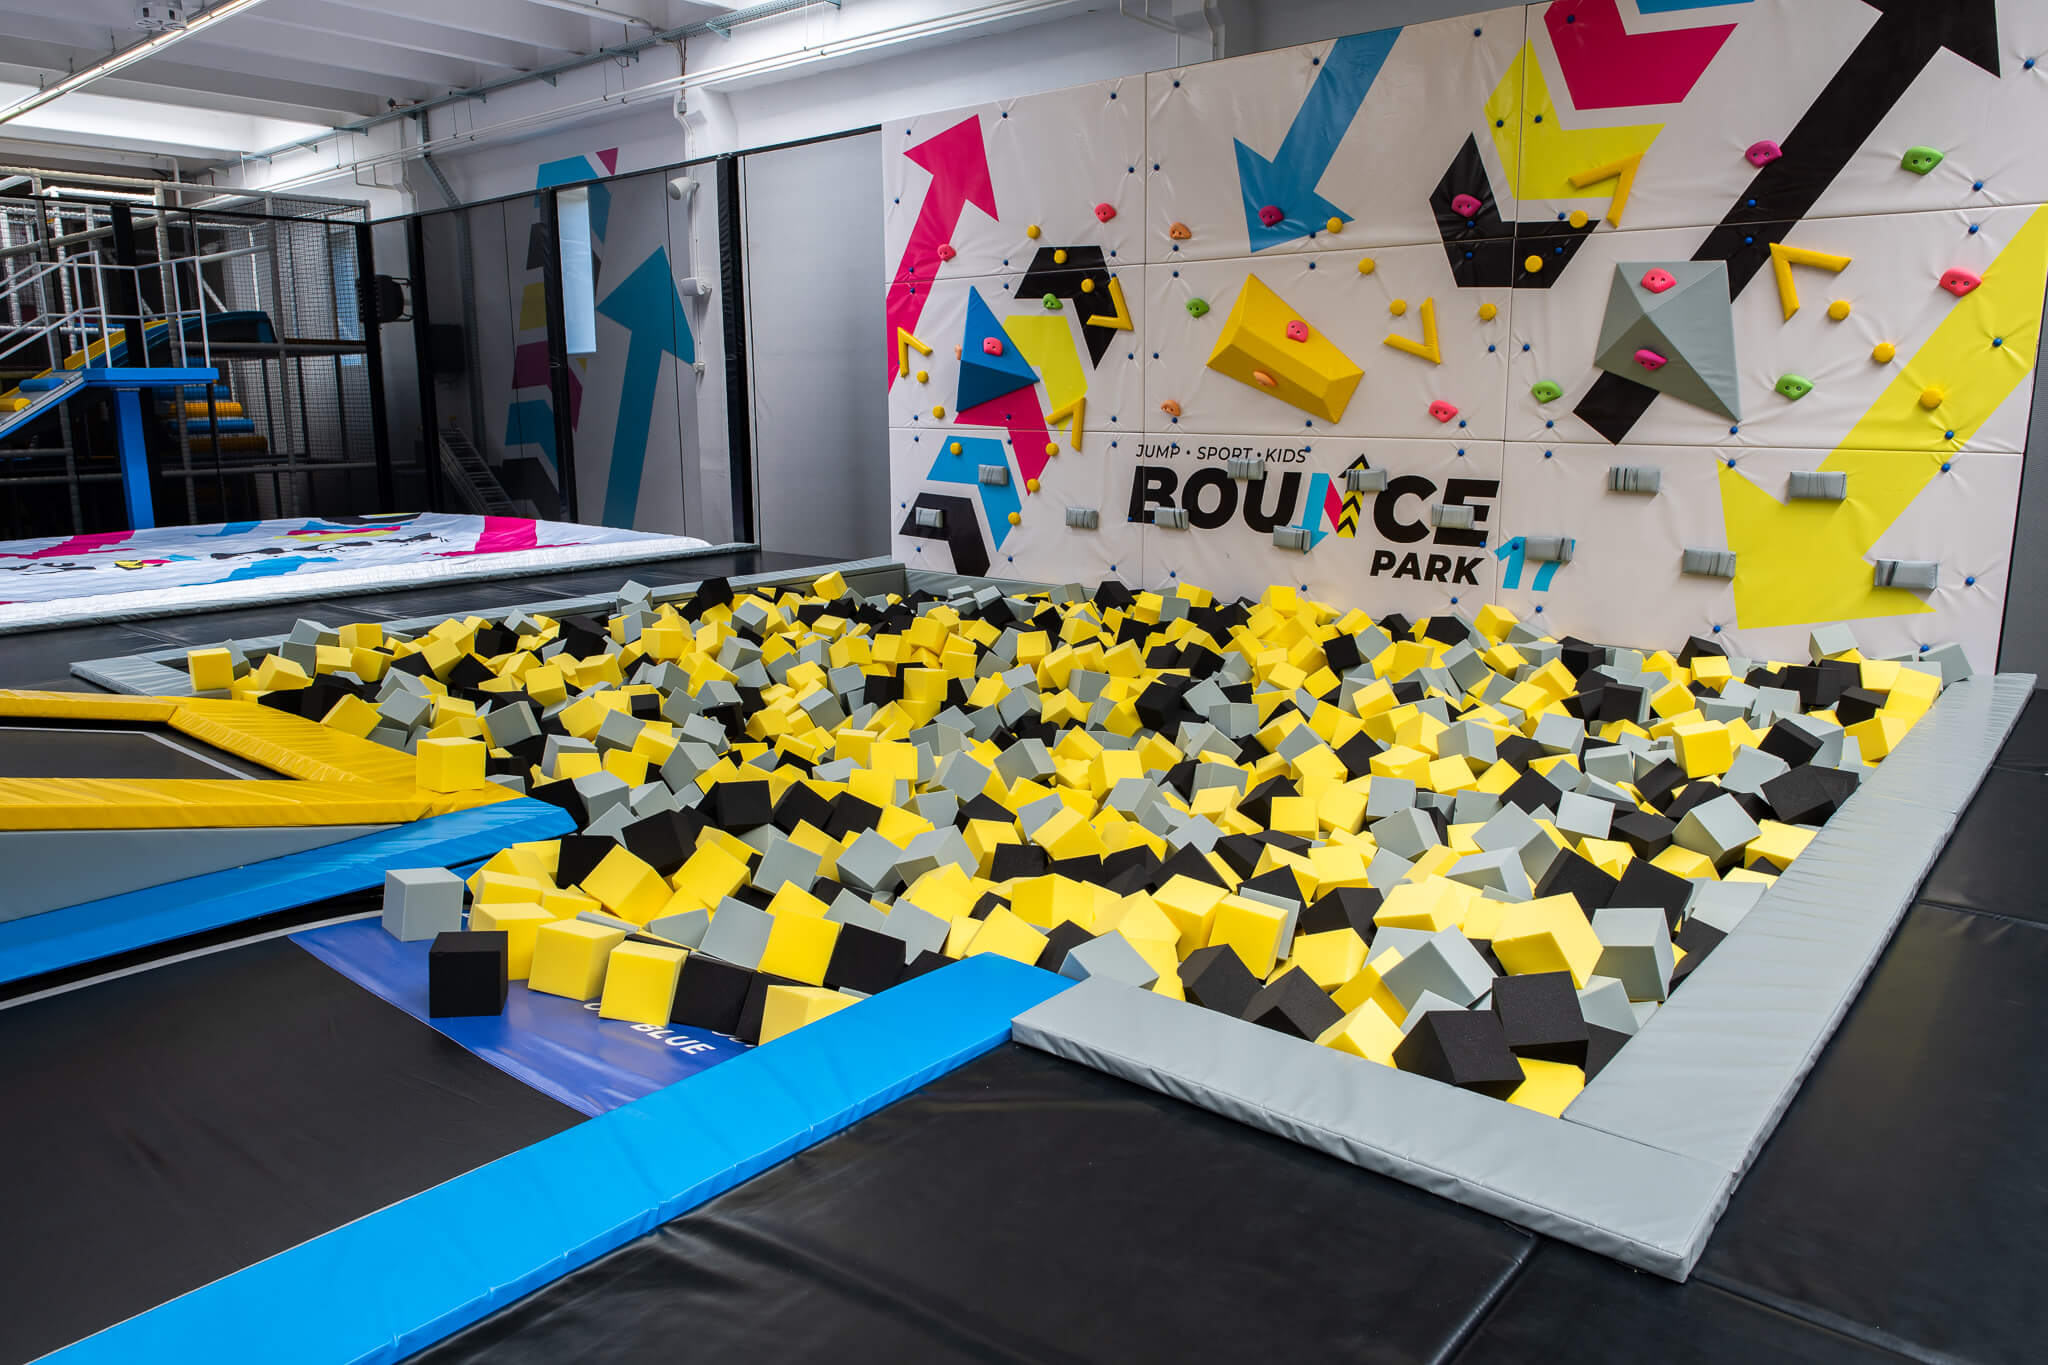 Square foam pit with climbing wall